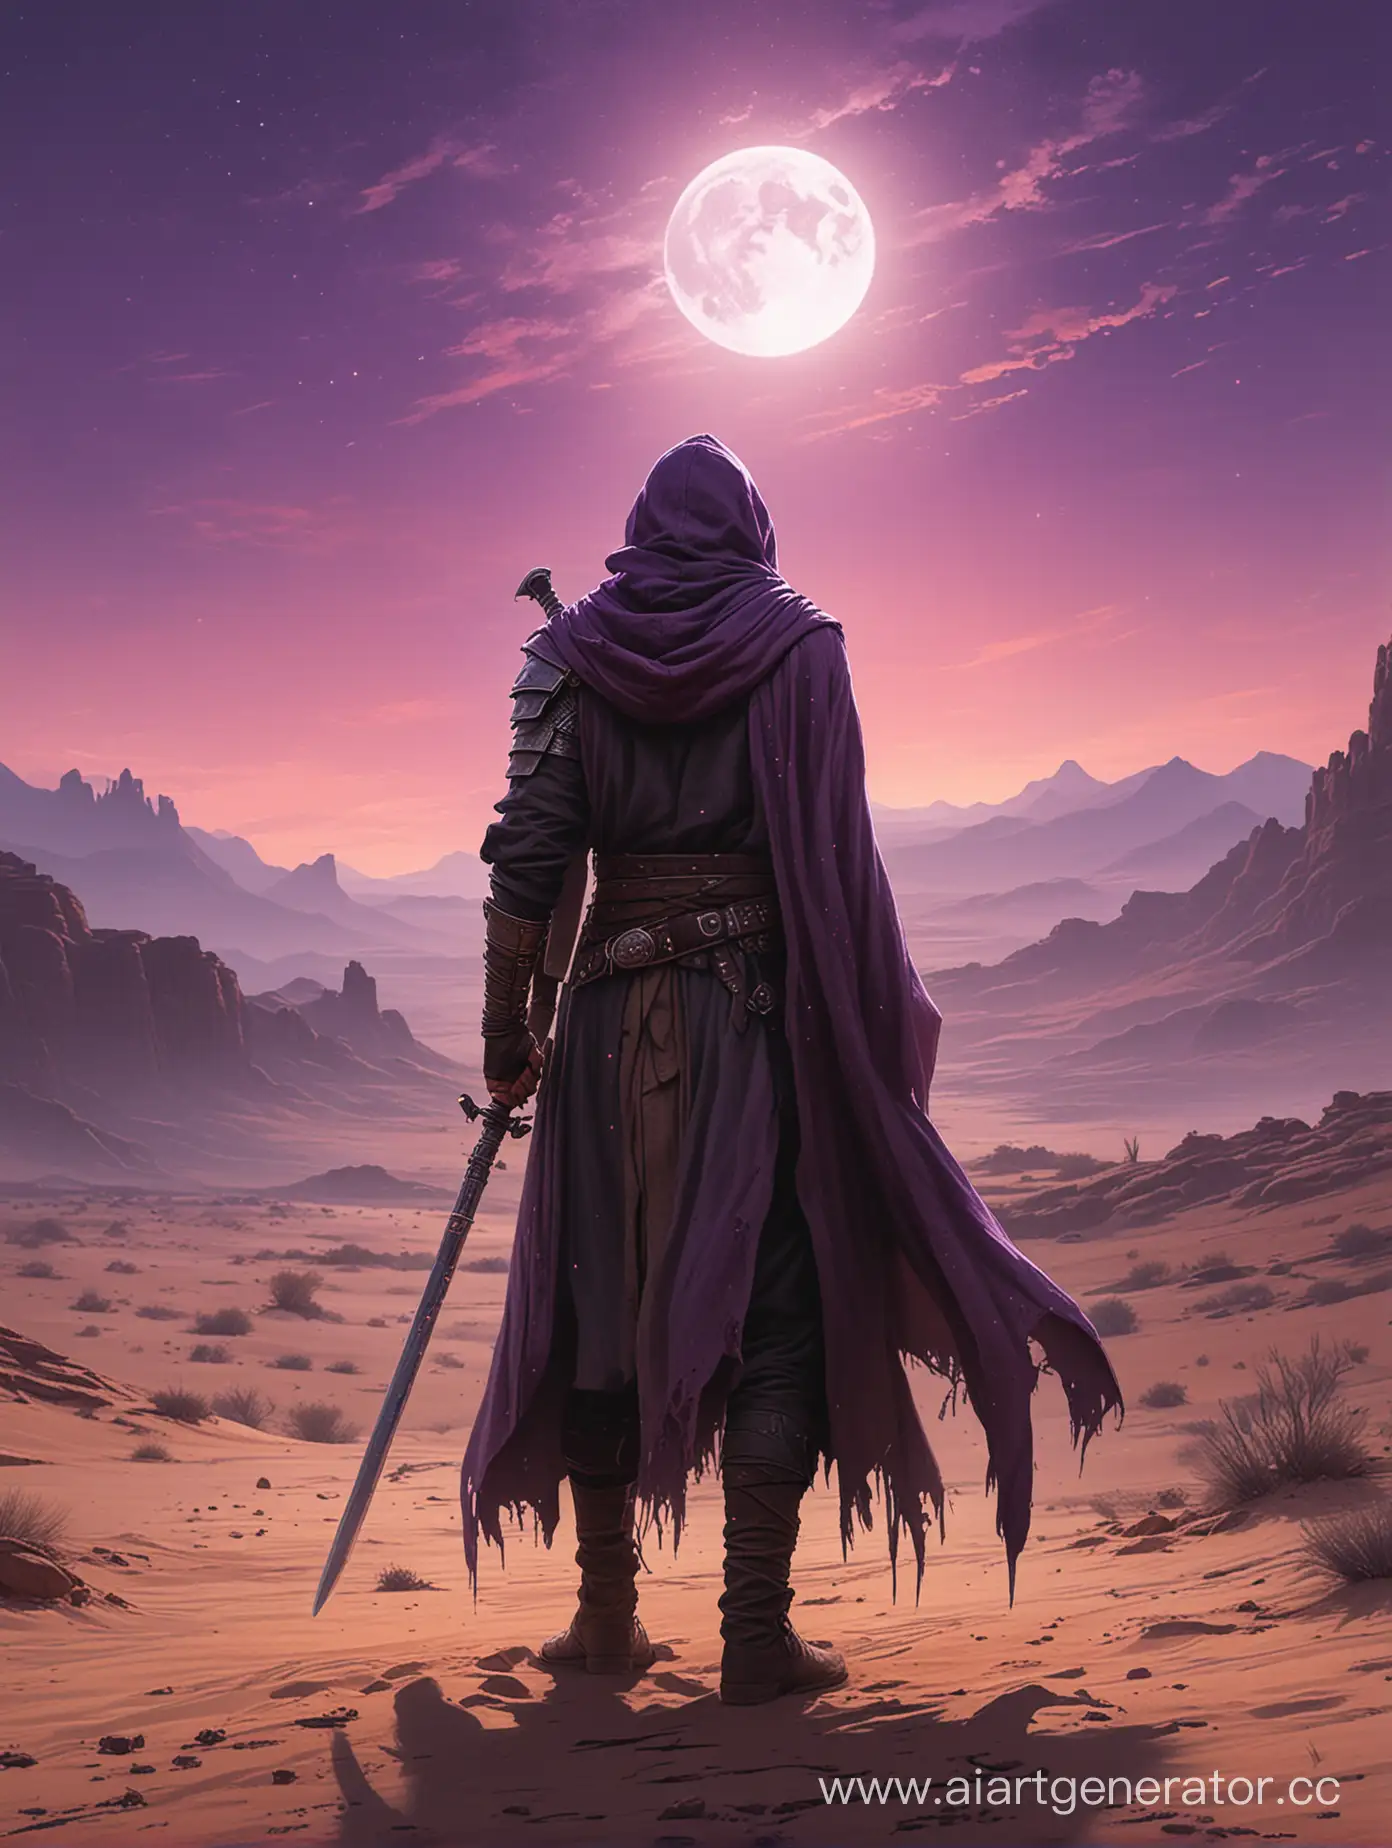 Mysterious-Hooded-Figure-with-Saber-in-Desert-Moonlight